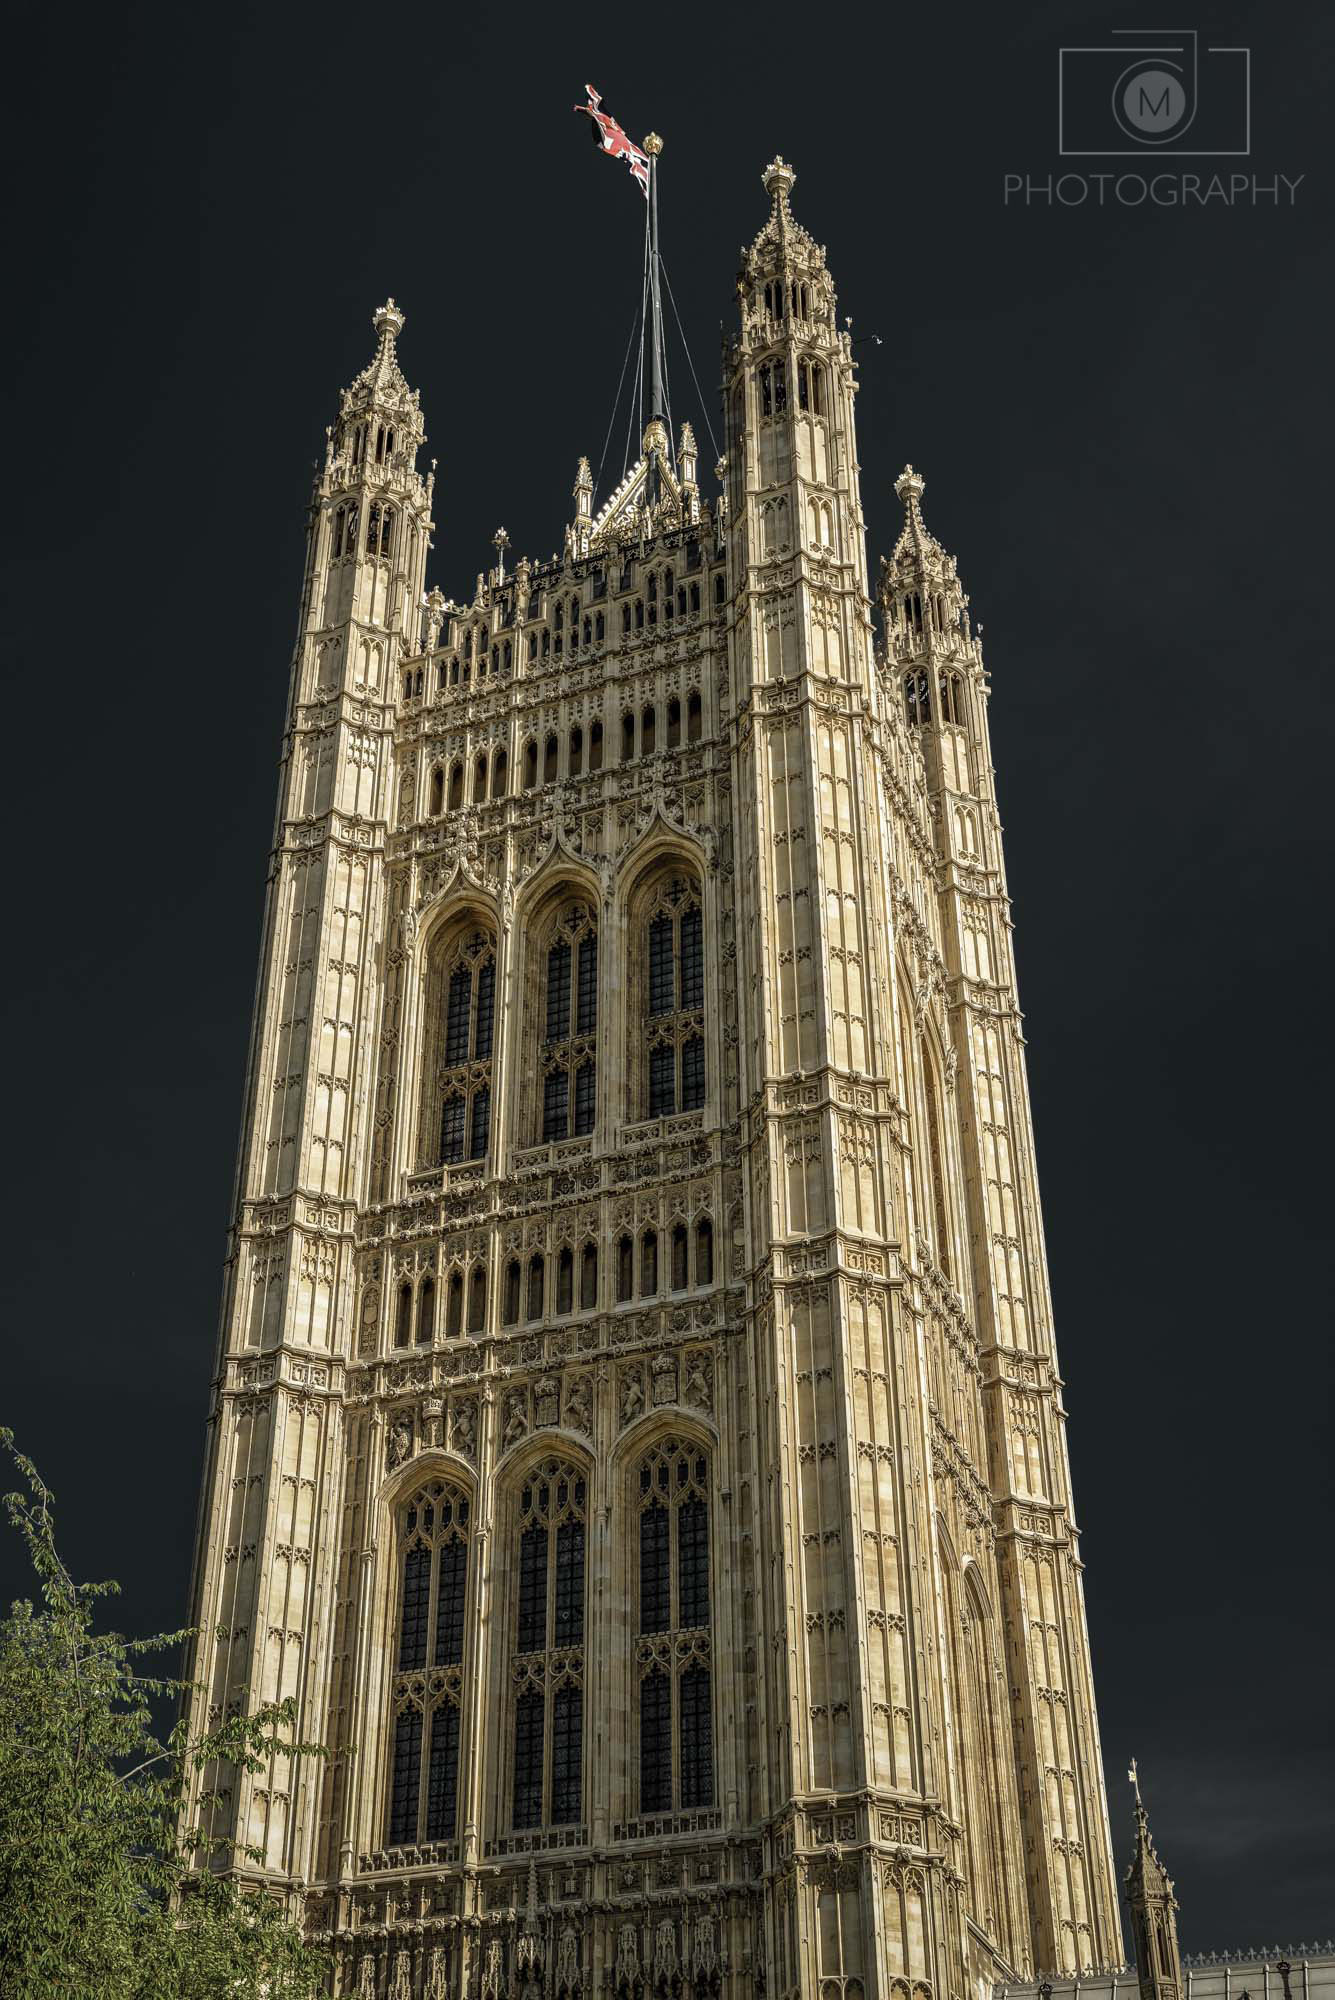 Victoria Tower - Palace of Westminster, Londýn